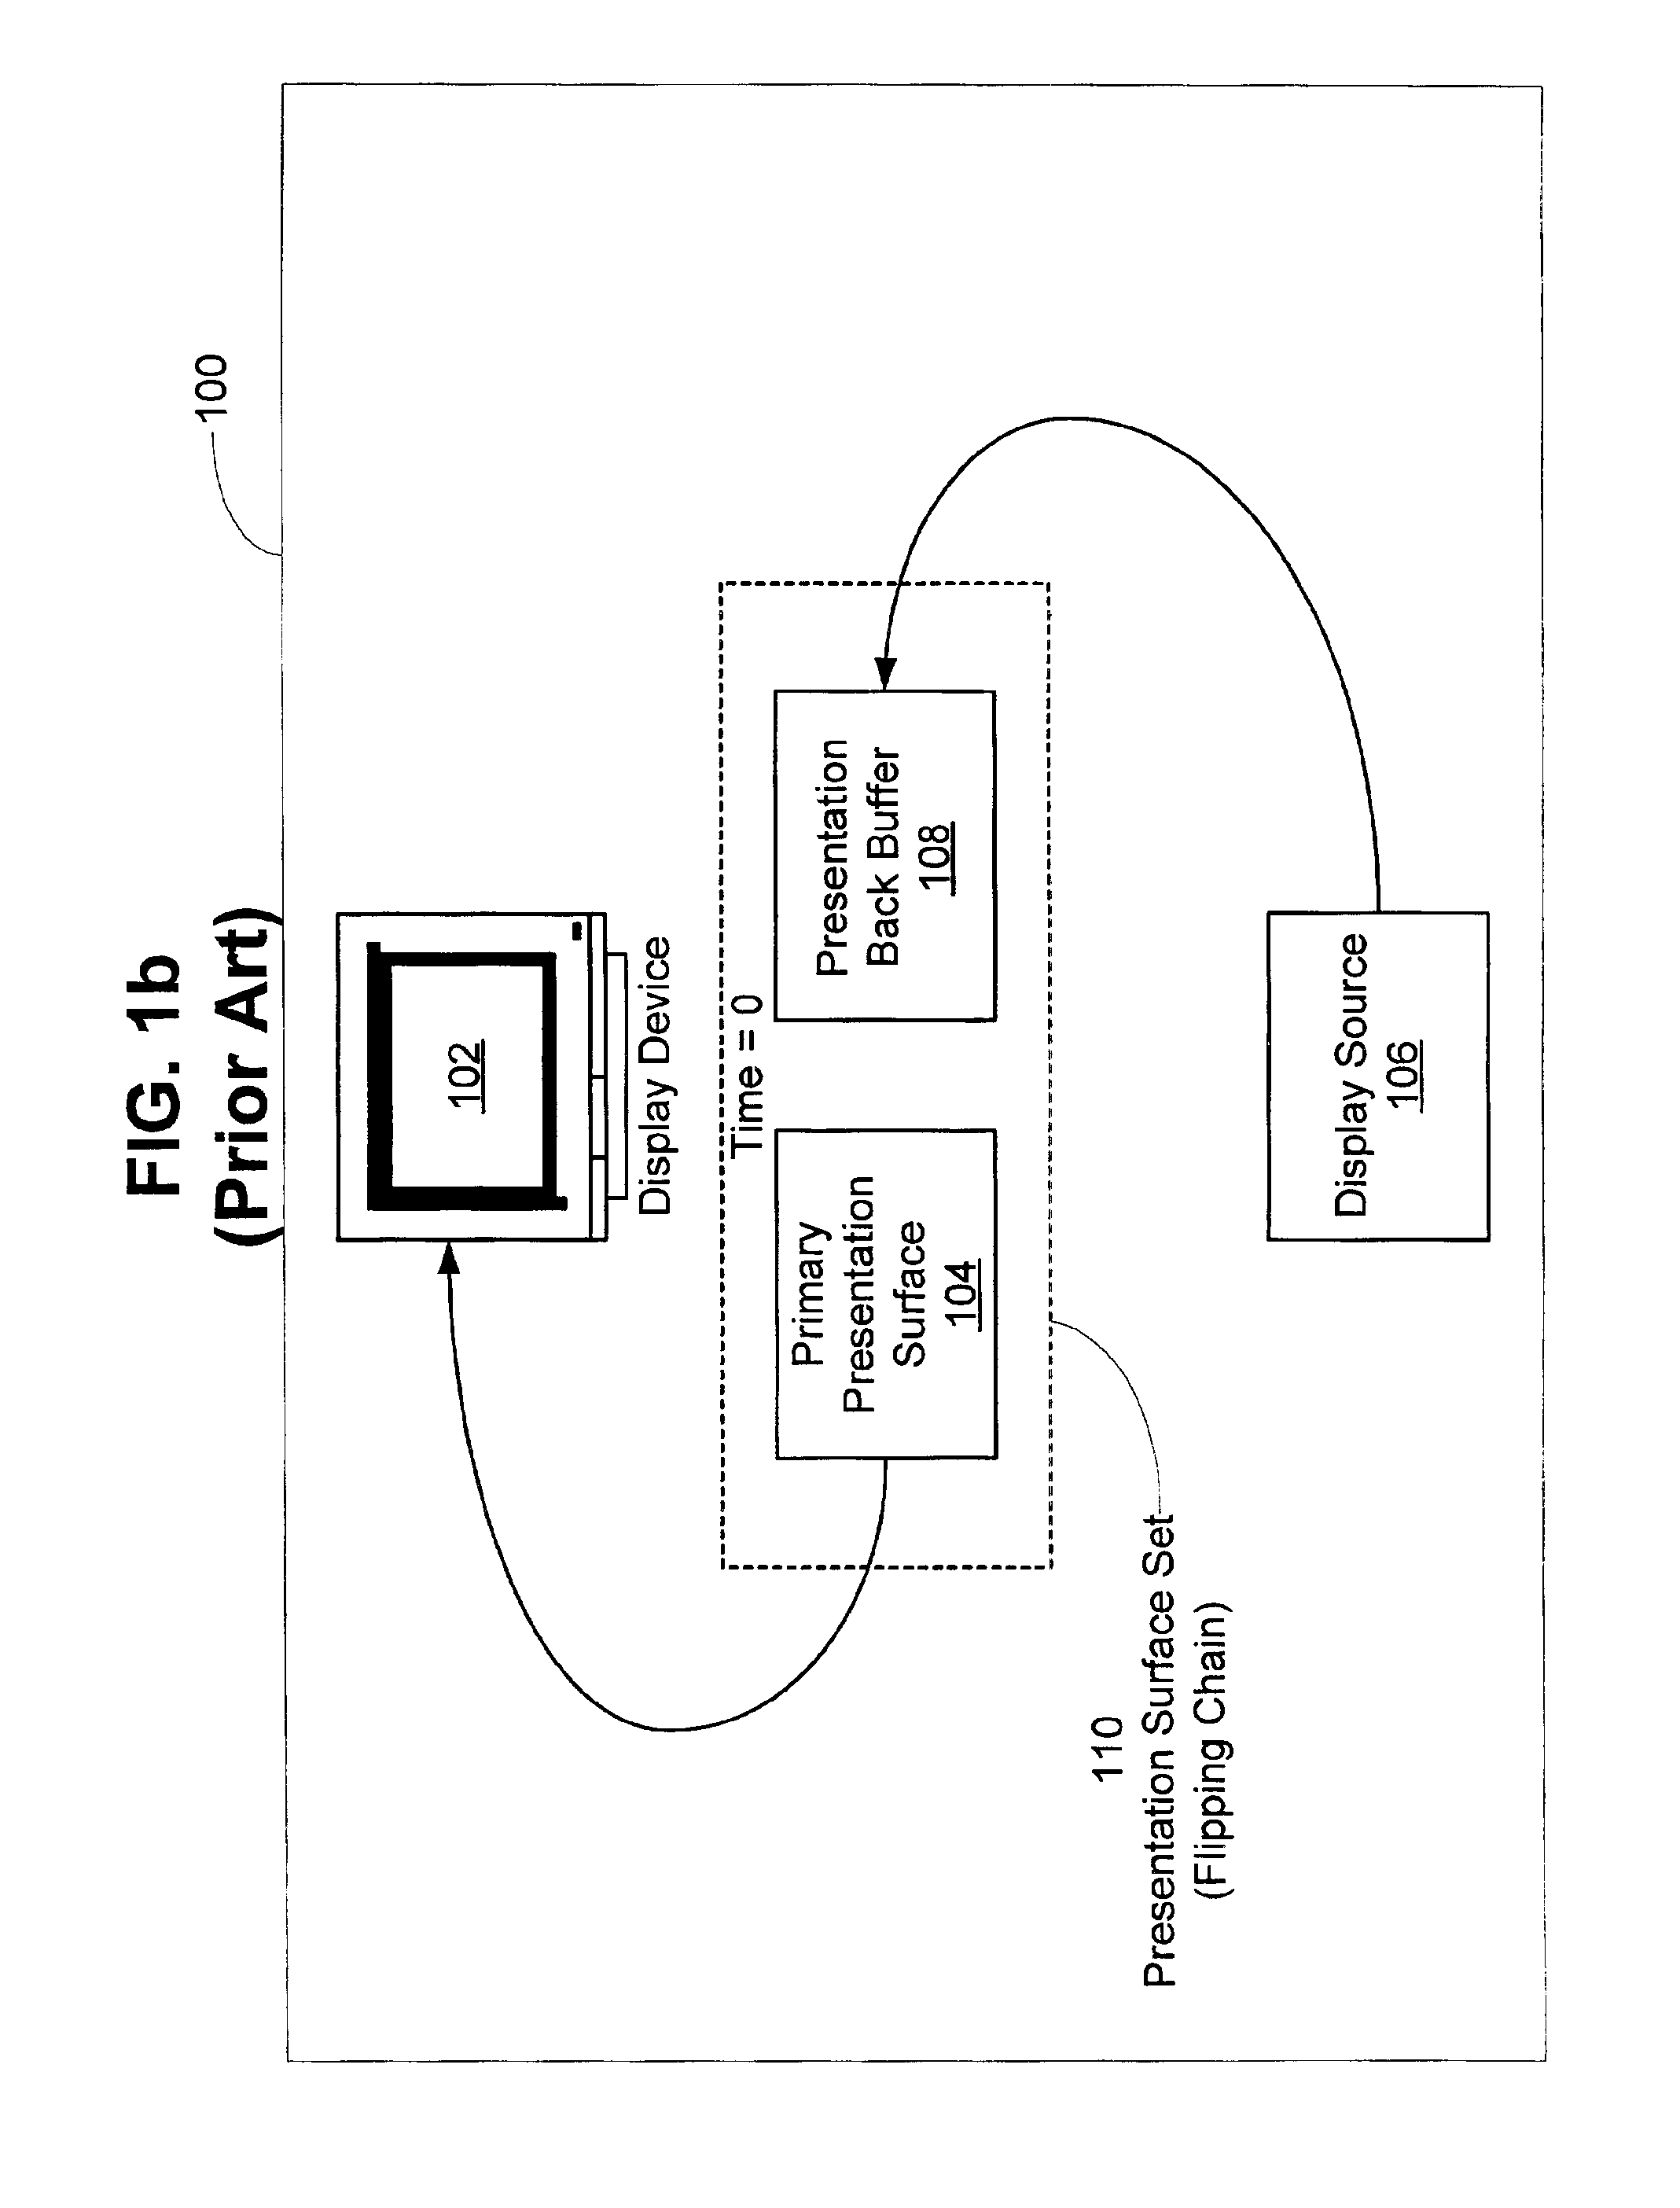 Methods and systems for displaying animated graphics on a computing device